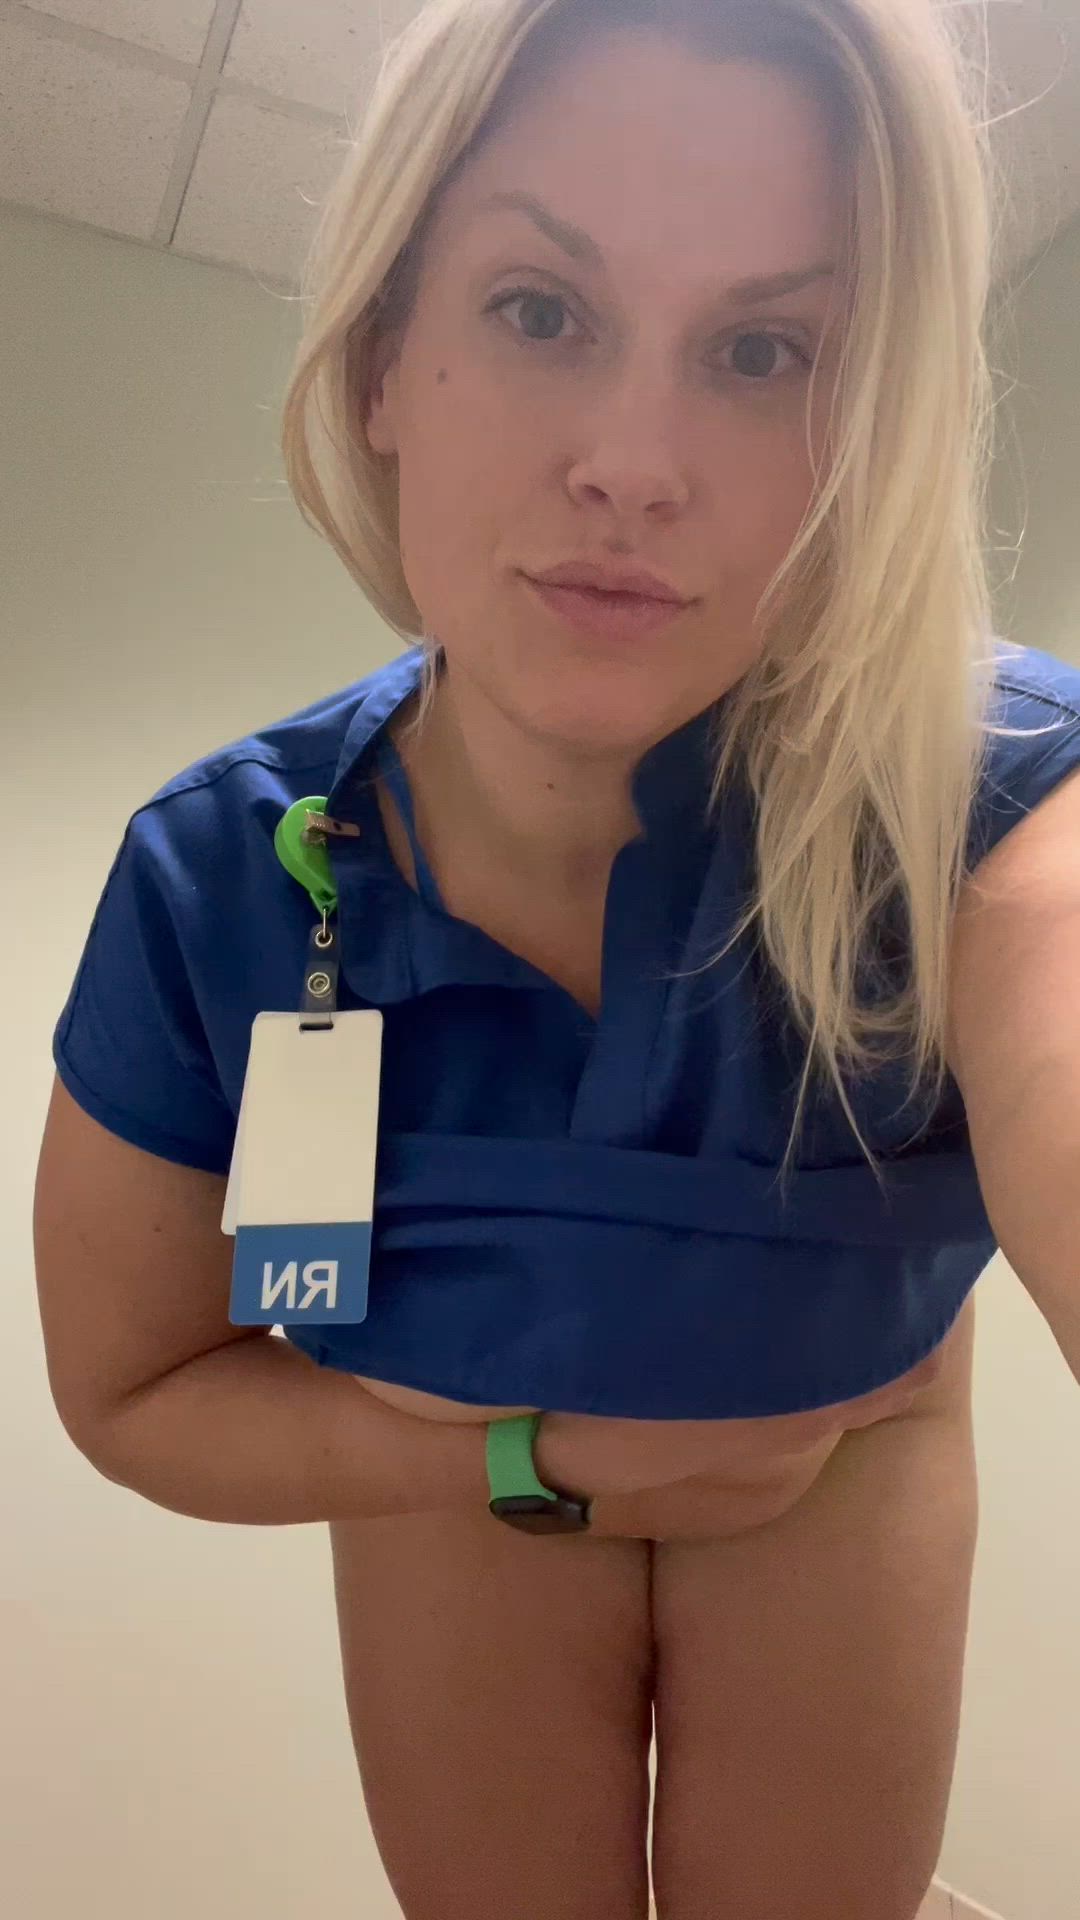 Amateur porn video with onlyfans model nursebrooklyn <strong>@nursebrooklyn</strong>